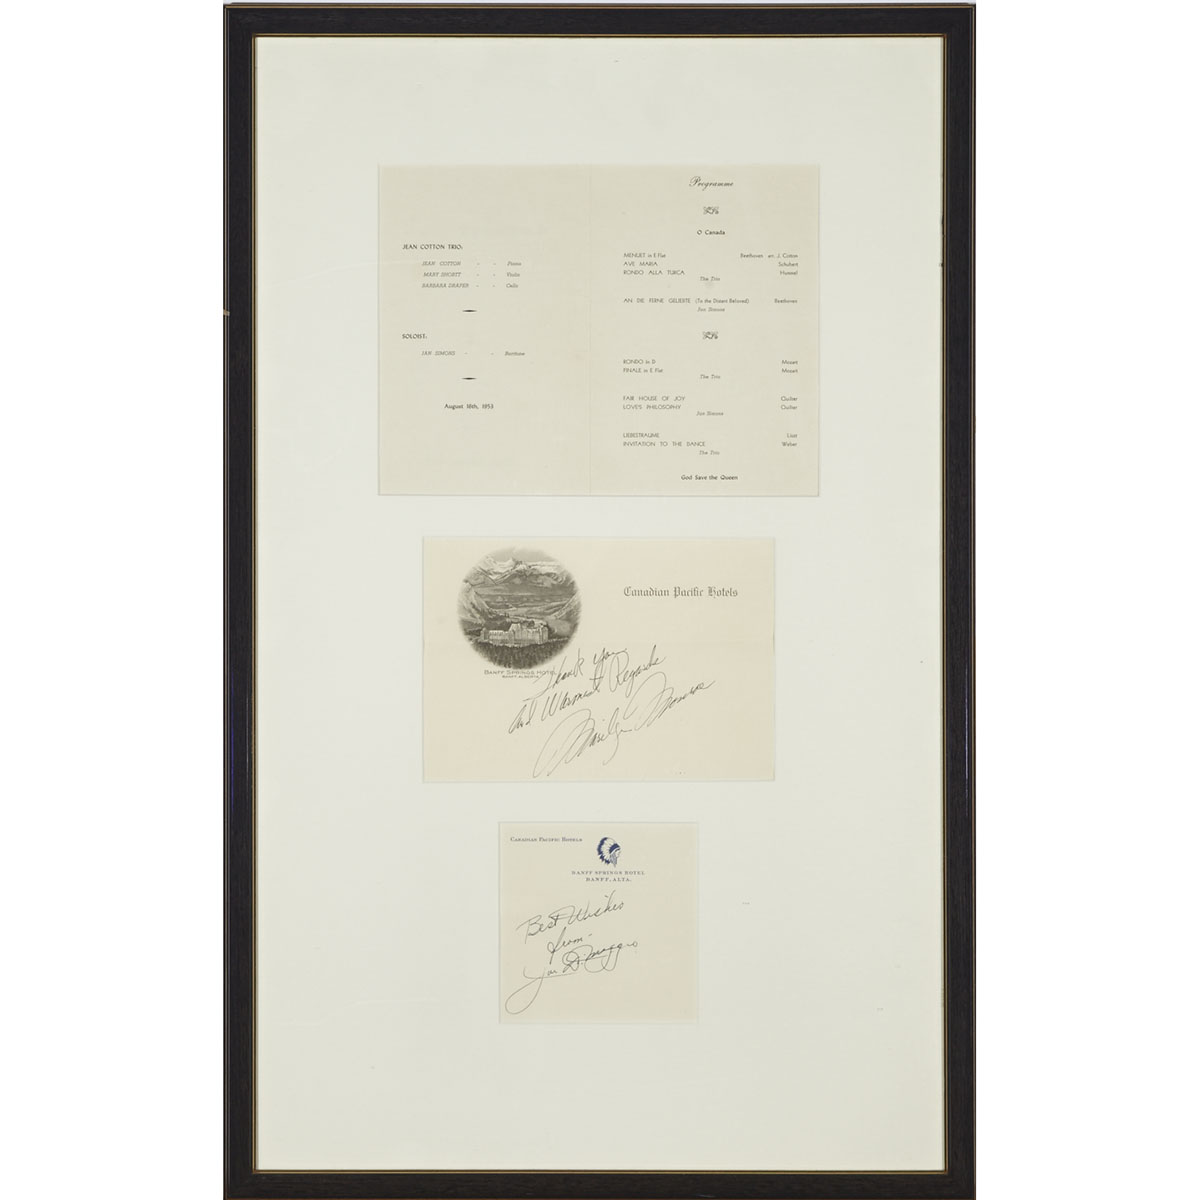 Marilyn Monroe and Joe Di Maggio Autographs collected at Banff Spings Hotel, Alberta, August 16, 1953